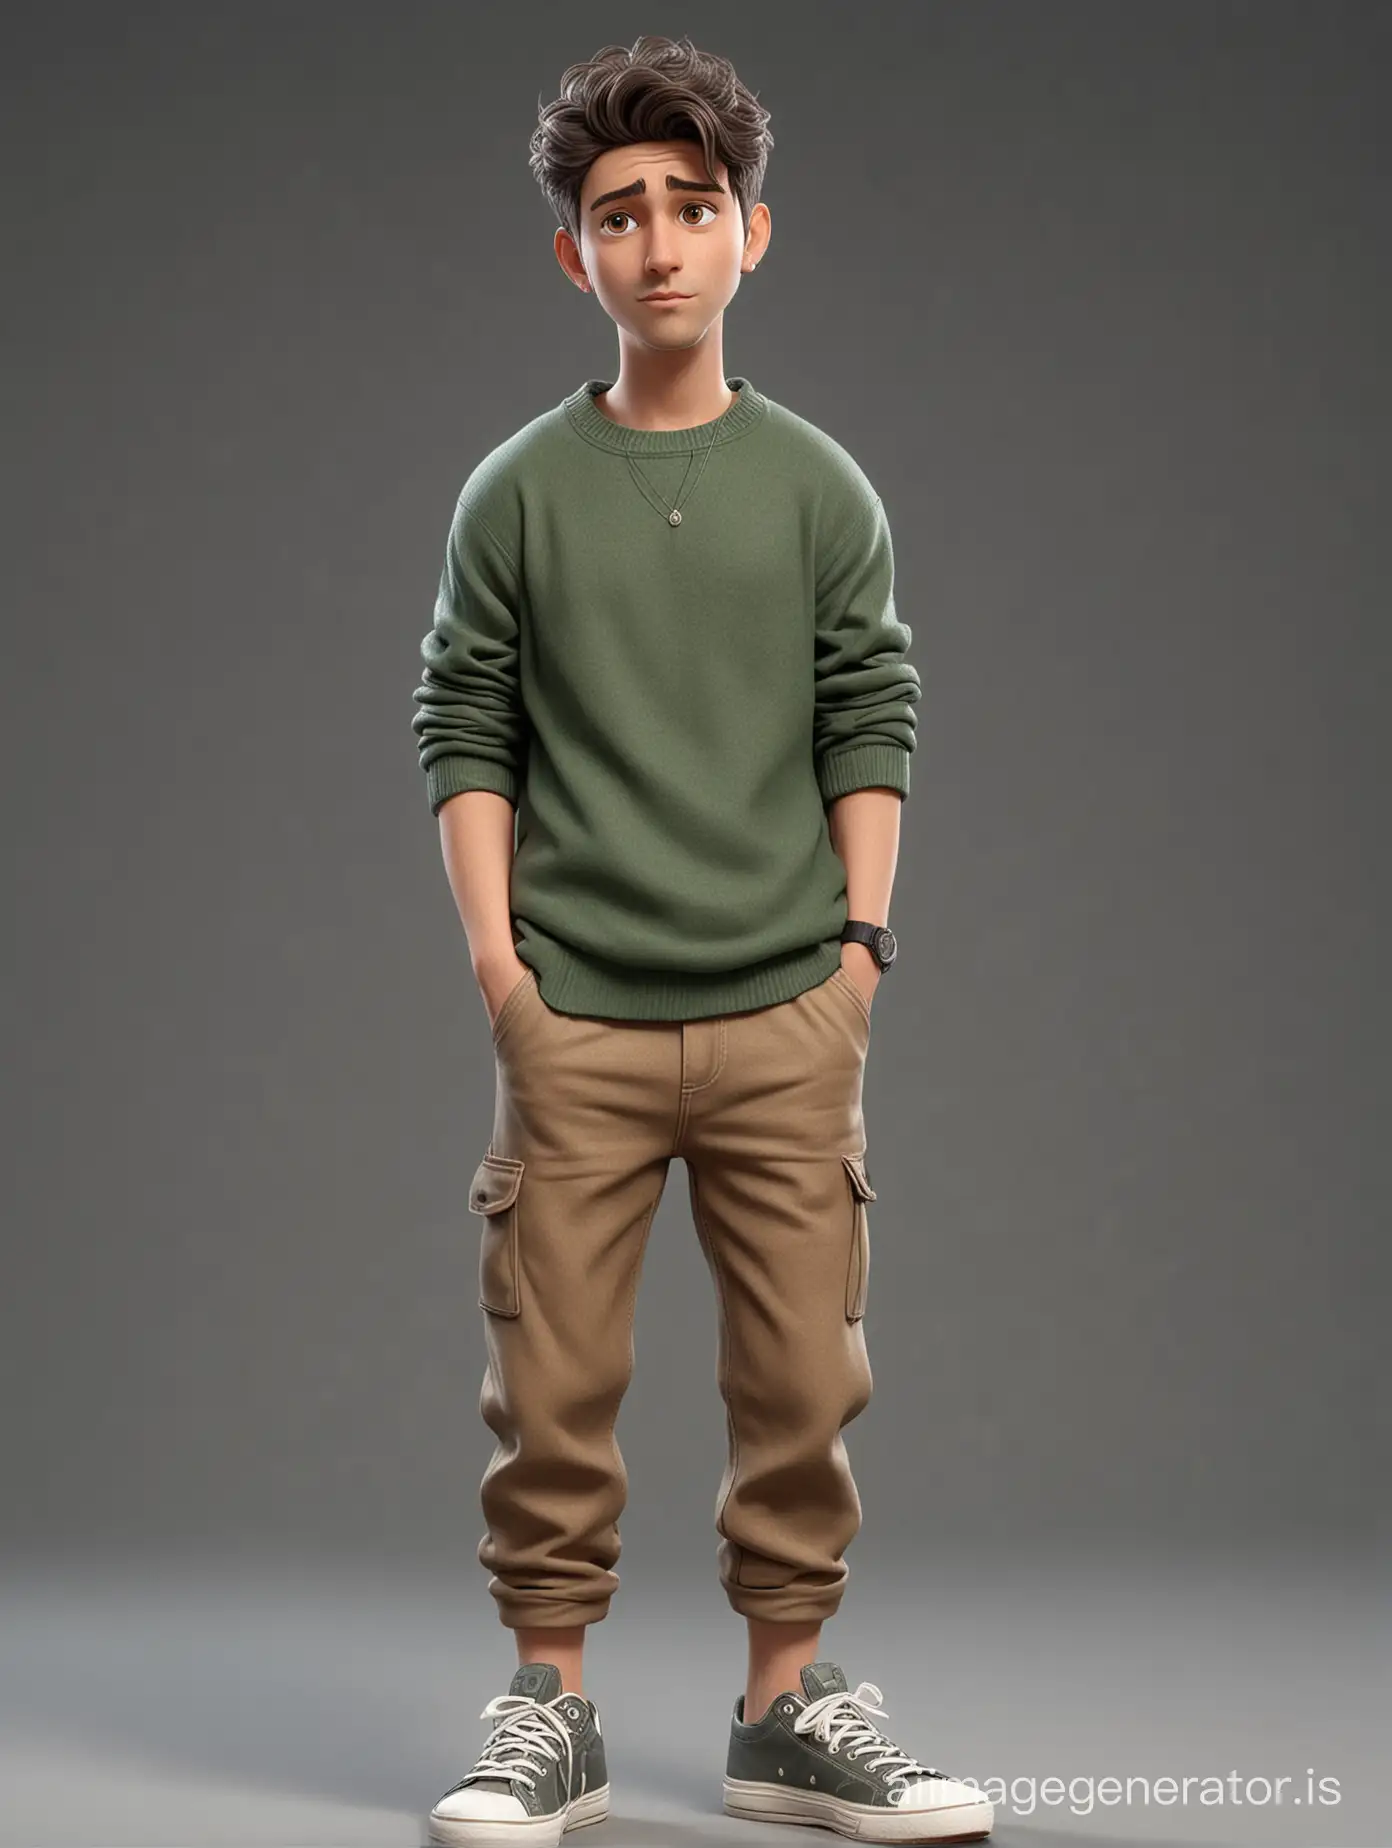 skeptical guy in cartoon style, A suspicious look, short beard, dark short wavy hair hairstyles, Wearing a loose sweater, khaki jeans, sneakers, full-body shot, the modest pose of the model,  full growth, maximum detail, best quality, HD, gorgeous light and shadow, detailed design, 3D quality